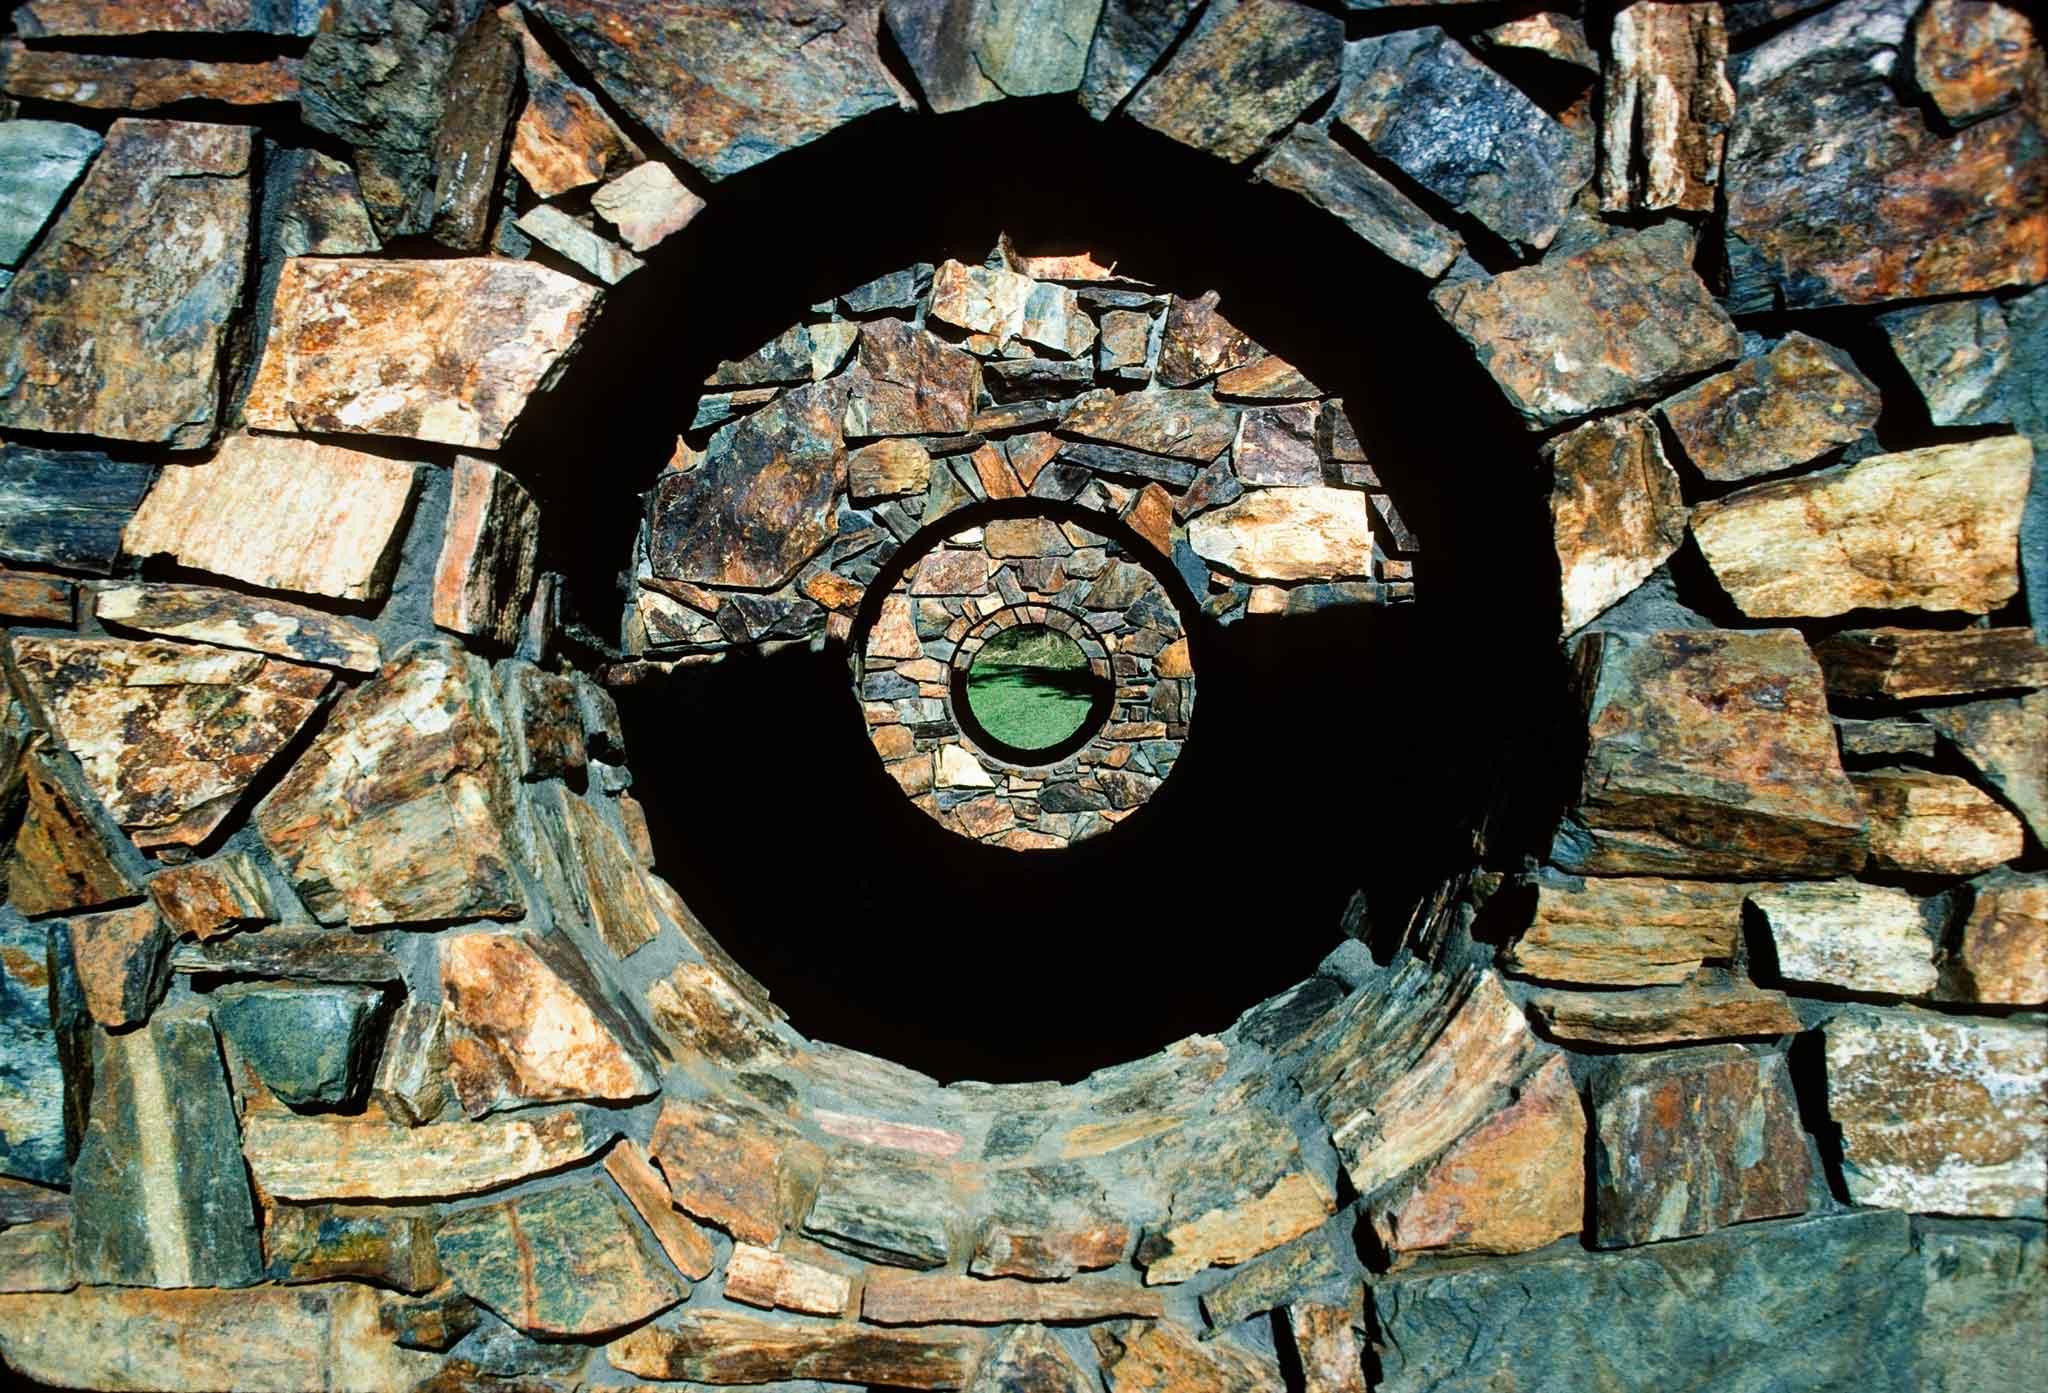 Concentric circular openings in stone walls in the center of the images. Brown stone and dark shadow and grass filling the centermost circle.